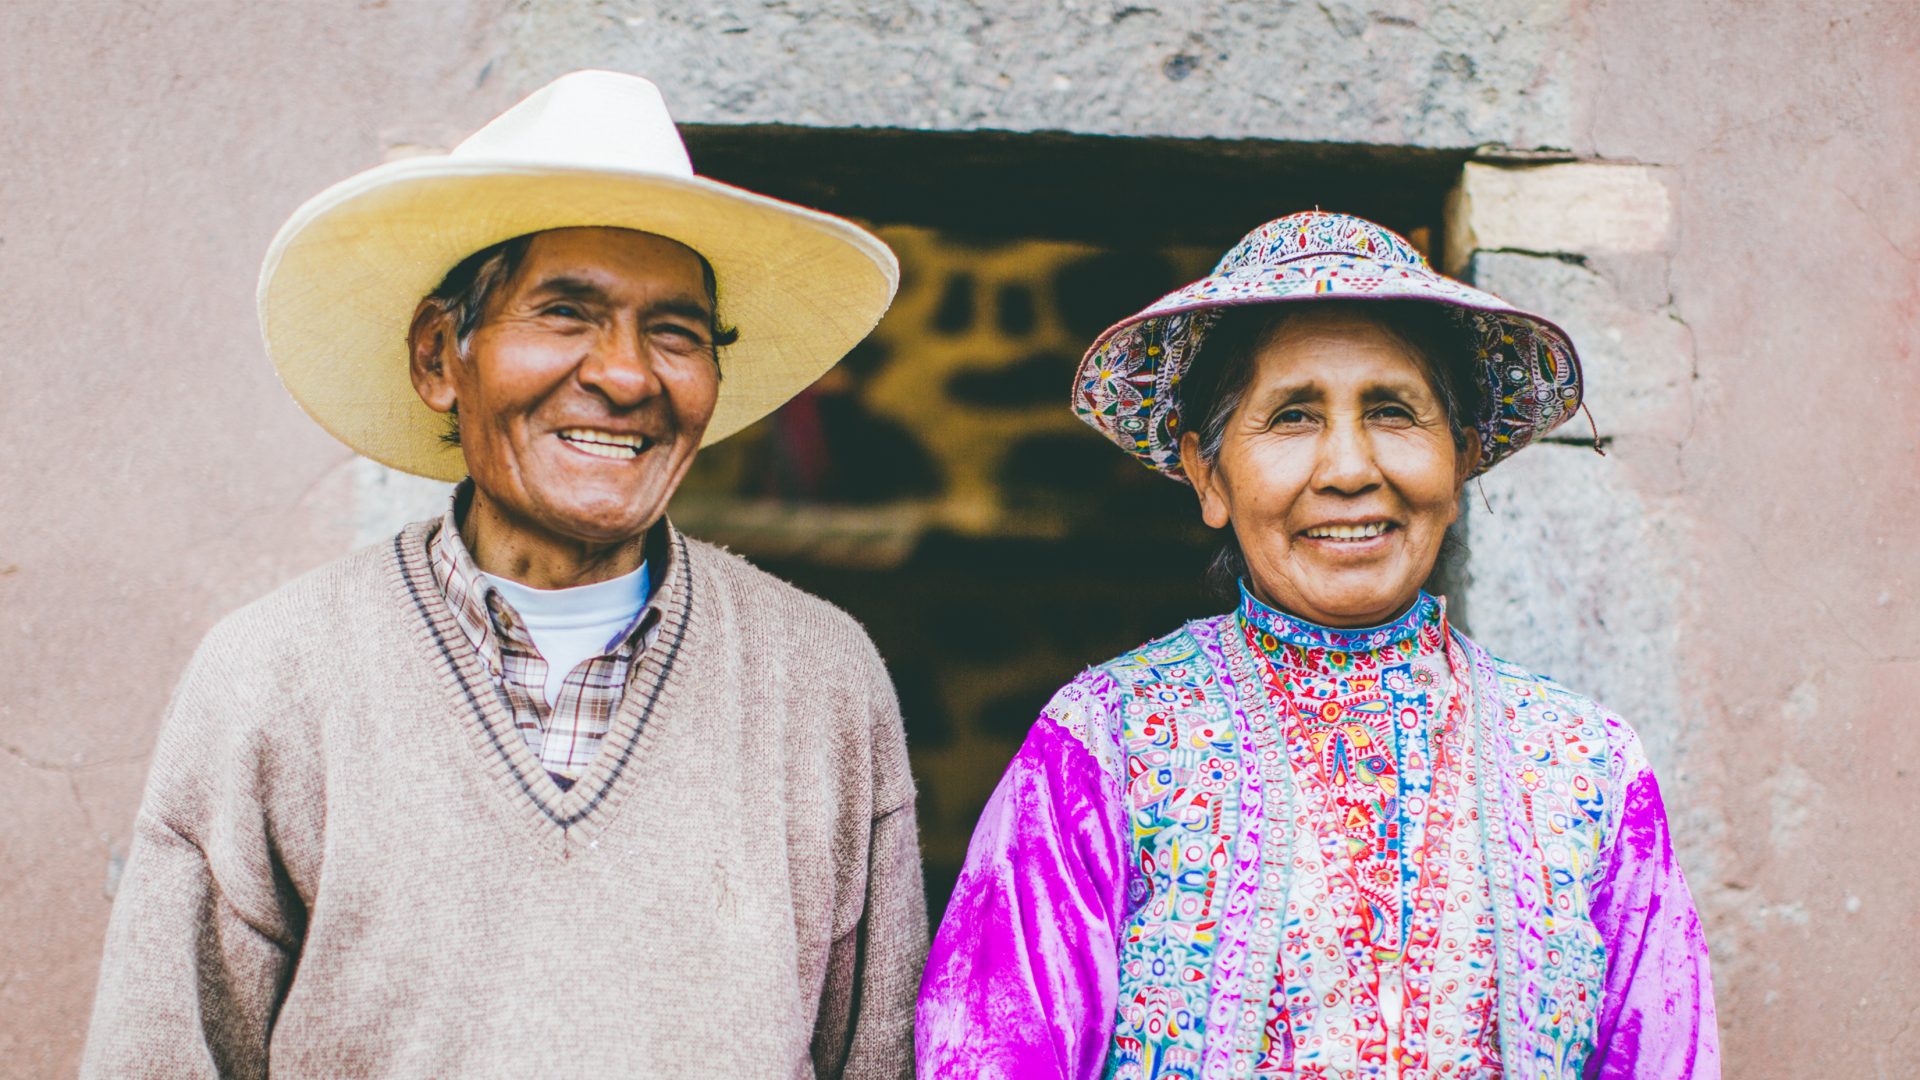 Finding community in Peru’s Colca Canyon